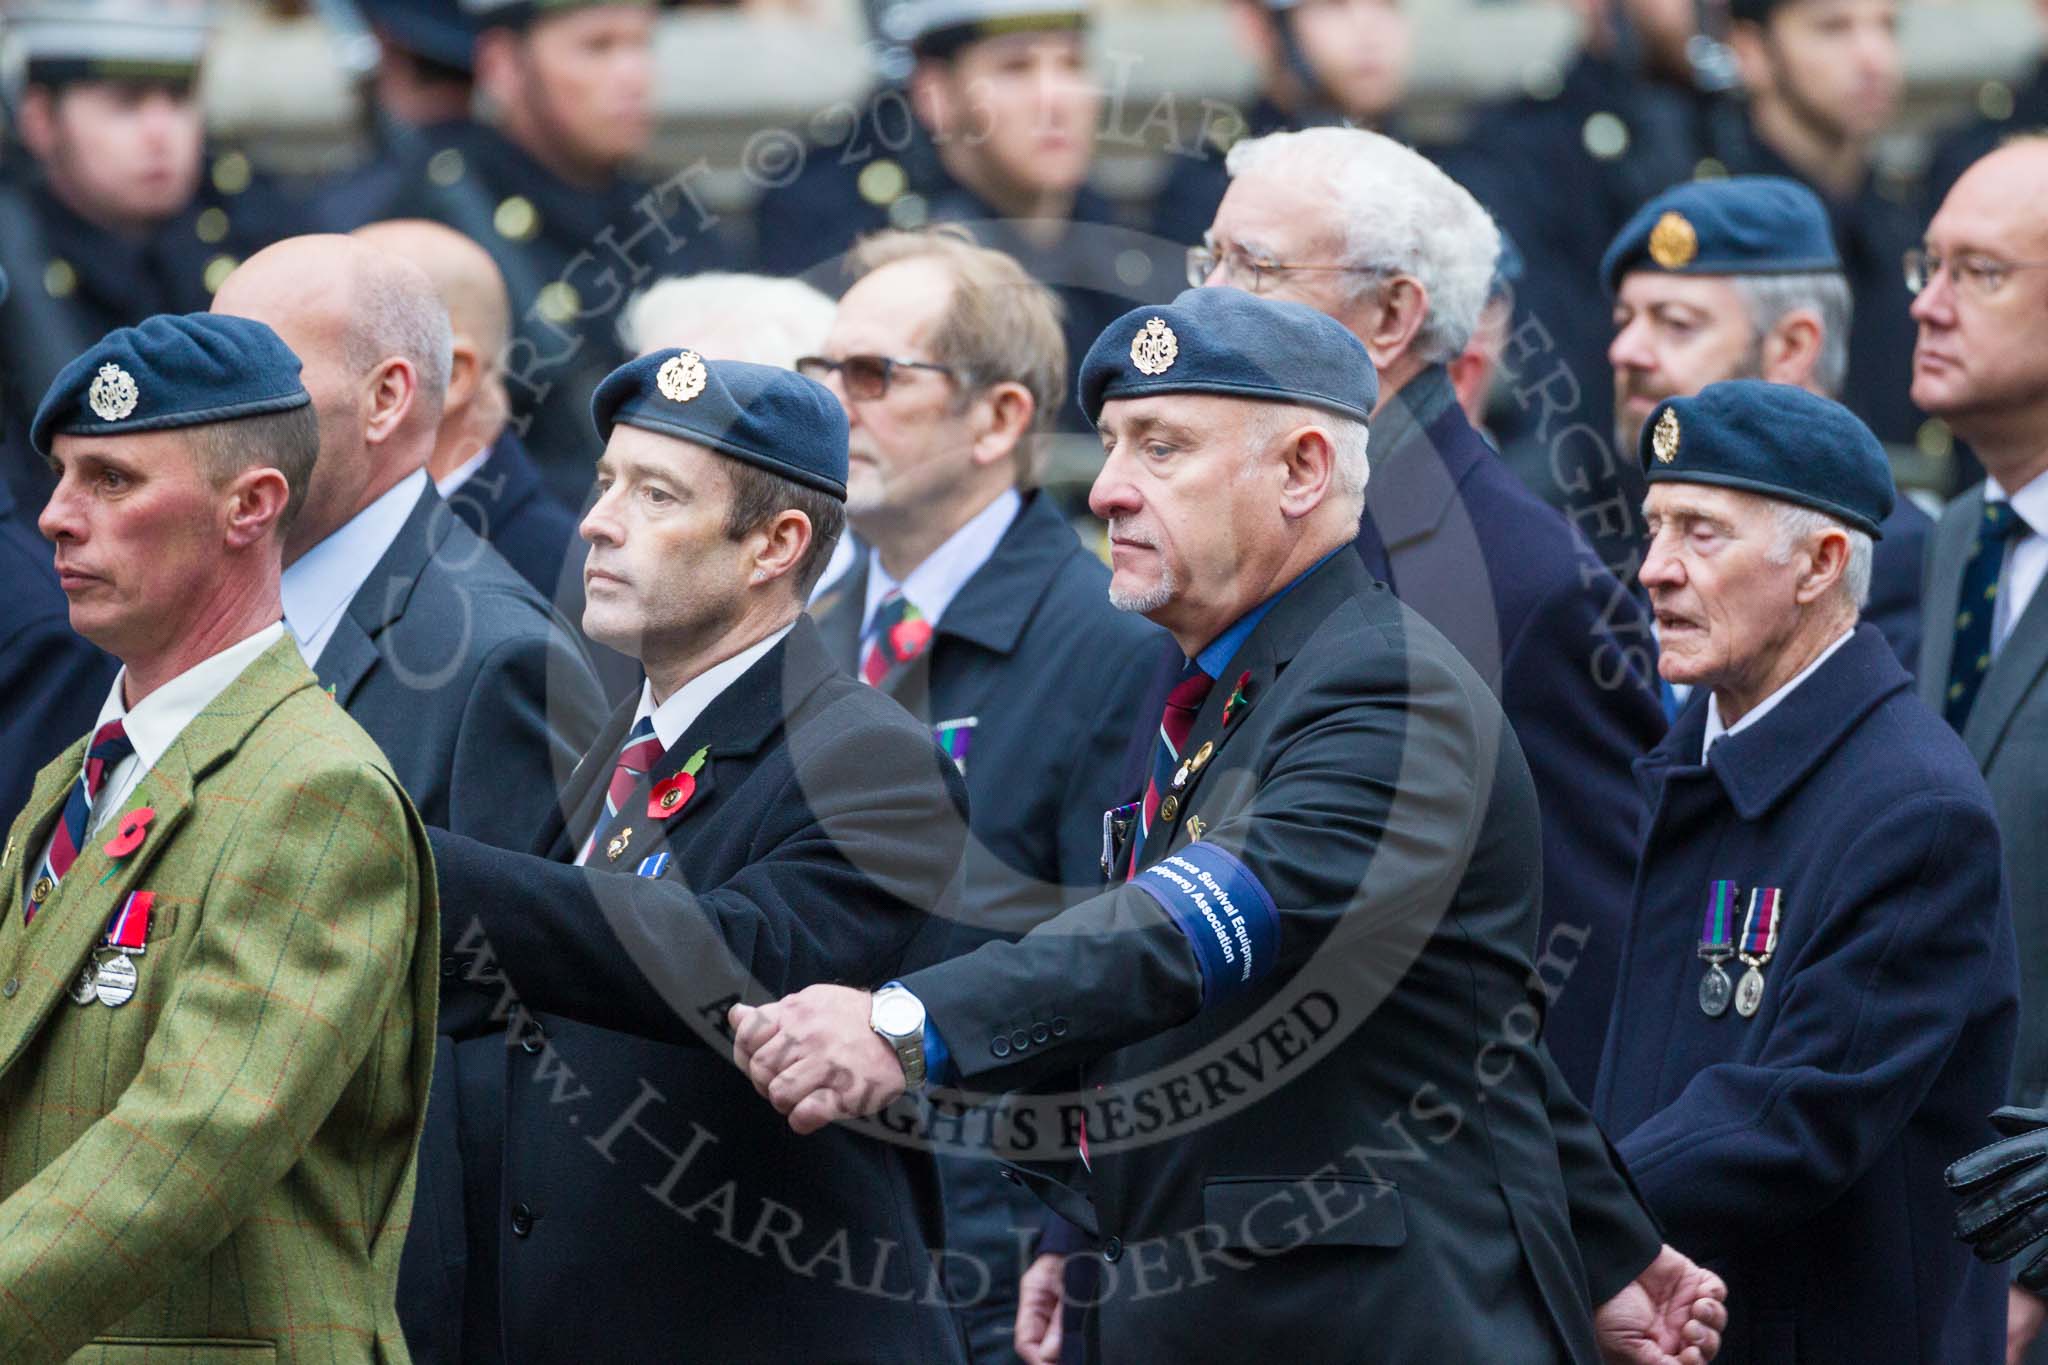 Remembrance Sunday at the Cenotaph 2015: Group C16, RAFSE(s) Assoc (New for 2015).
Cenotaph, Whitehall, London SW1,
London,
Greater London,
United Kingdom,
on 08 November 2015 at 11:49, image #520